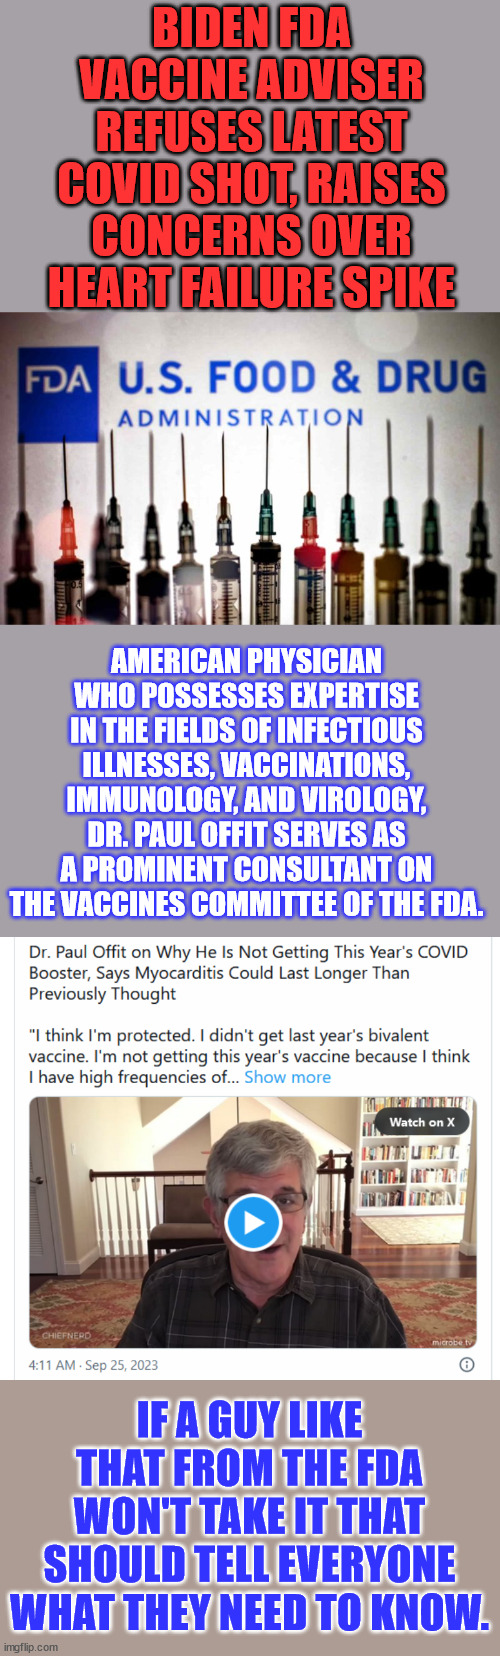 What does that tell you when the FDA advisor won't take it... | BIDEN FDA VACCINE ADVISER REFUSES LATEST COVID SHOT, RAISES CONCERNS OVER HEART FAILURE SPIKE; AMERICAN PHYSICIAN WHO POSSESSES EXPERTISE IN THE FIELDS OF INFECTIOUS ILLNESSES, VACCINATIONS, IMMUNOLOGY, AND VIROLOGY, DR. PAUL OFFIT SERVES AS A PROMINENT CONSULTANT ON THE VACCINES COMMITTEE OF THE FDA. IF A GUY LIKE THAT FROM THE FDA WON'T TAKE IT THAT SHOULD TELL EVERYONE WHAT THEY NEED TO KNOW. | image tagged in government,expert,covid vaccine,advice | made w/ Imgflip meme maker